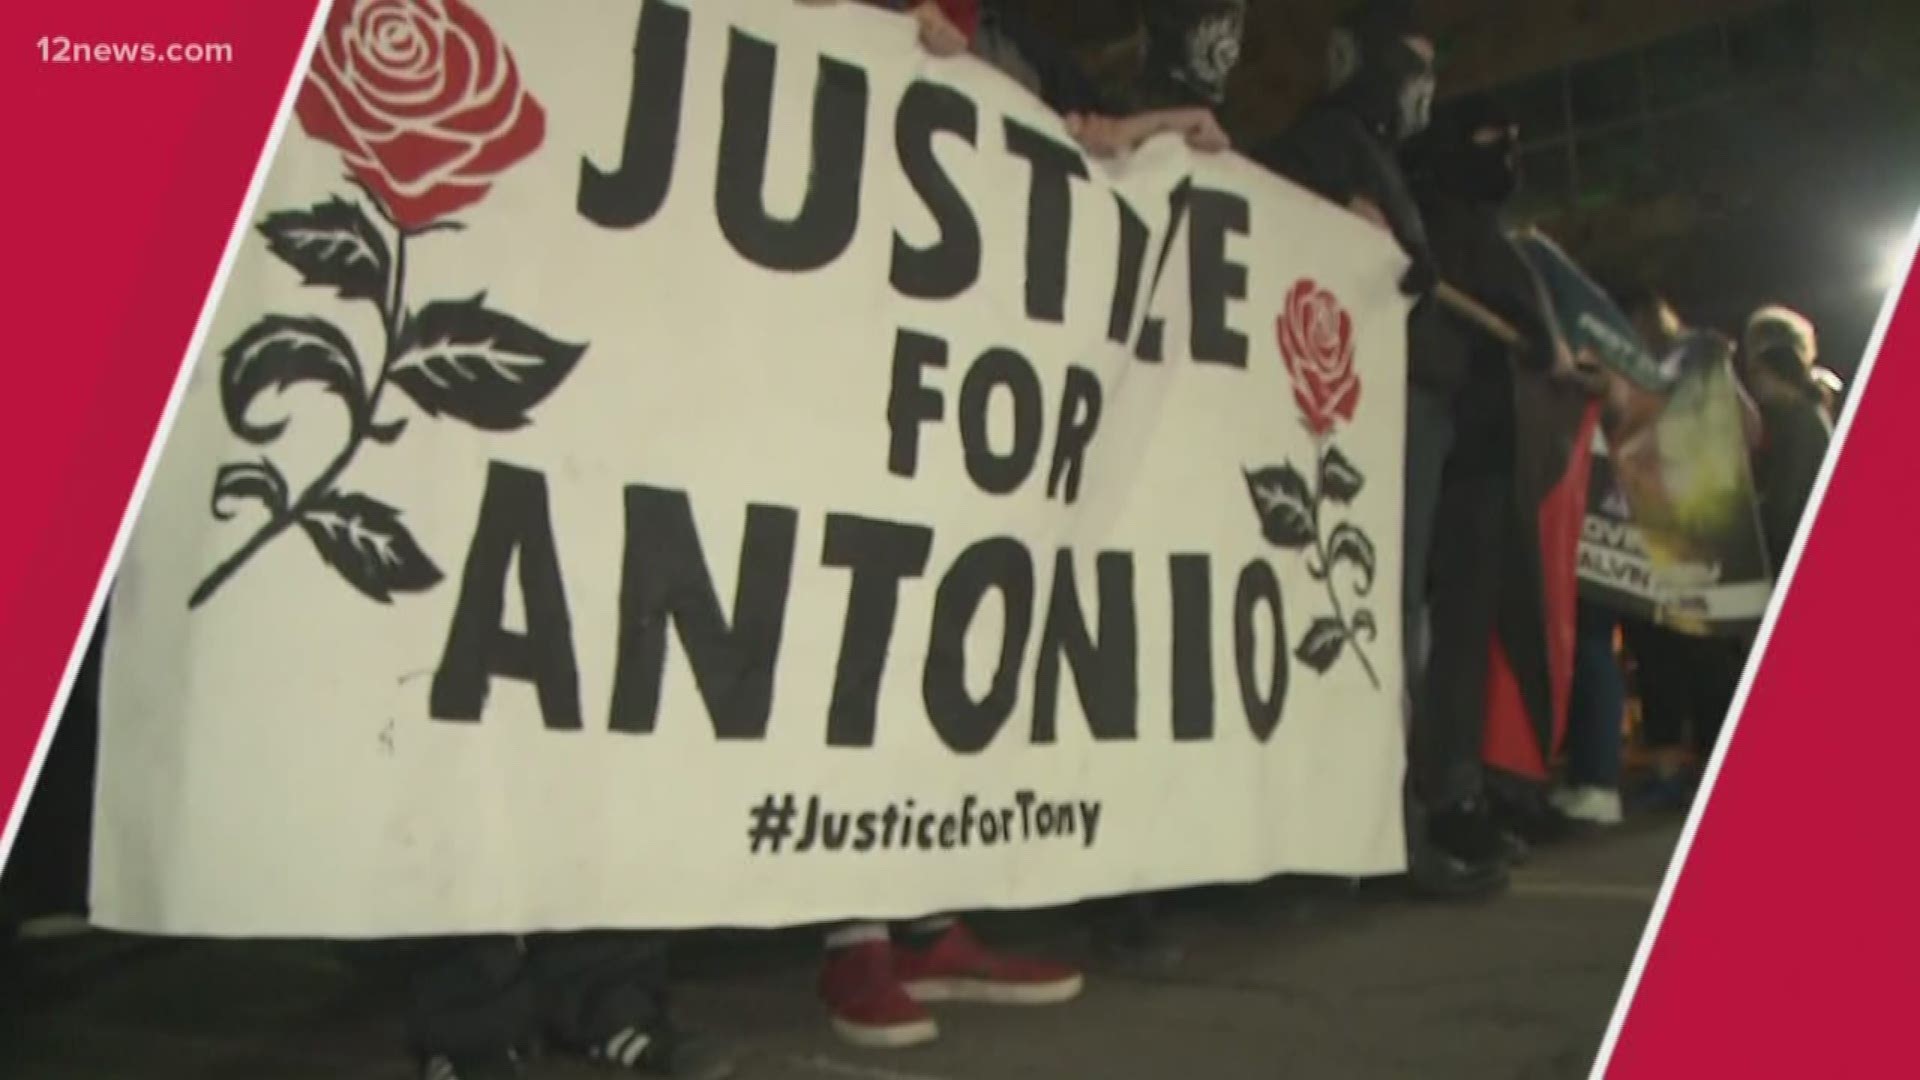 Protestors gathered in front of Tempe PD headquarters this evening, before storming the streets. The protestors gathered to demand justice for Antonio Gonzalez, a 14-year-old suspect who was shot and killed by a Tempe police officer.